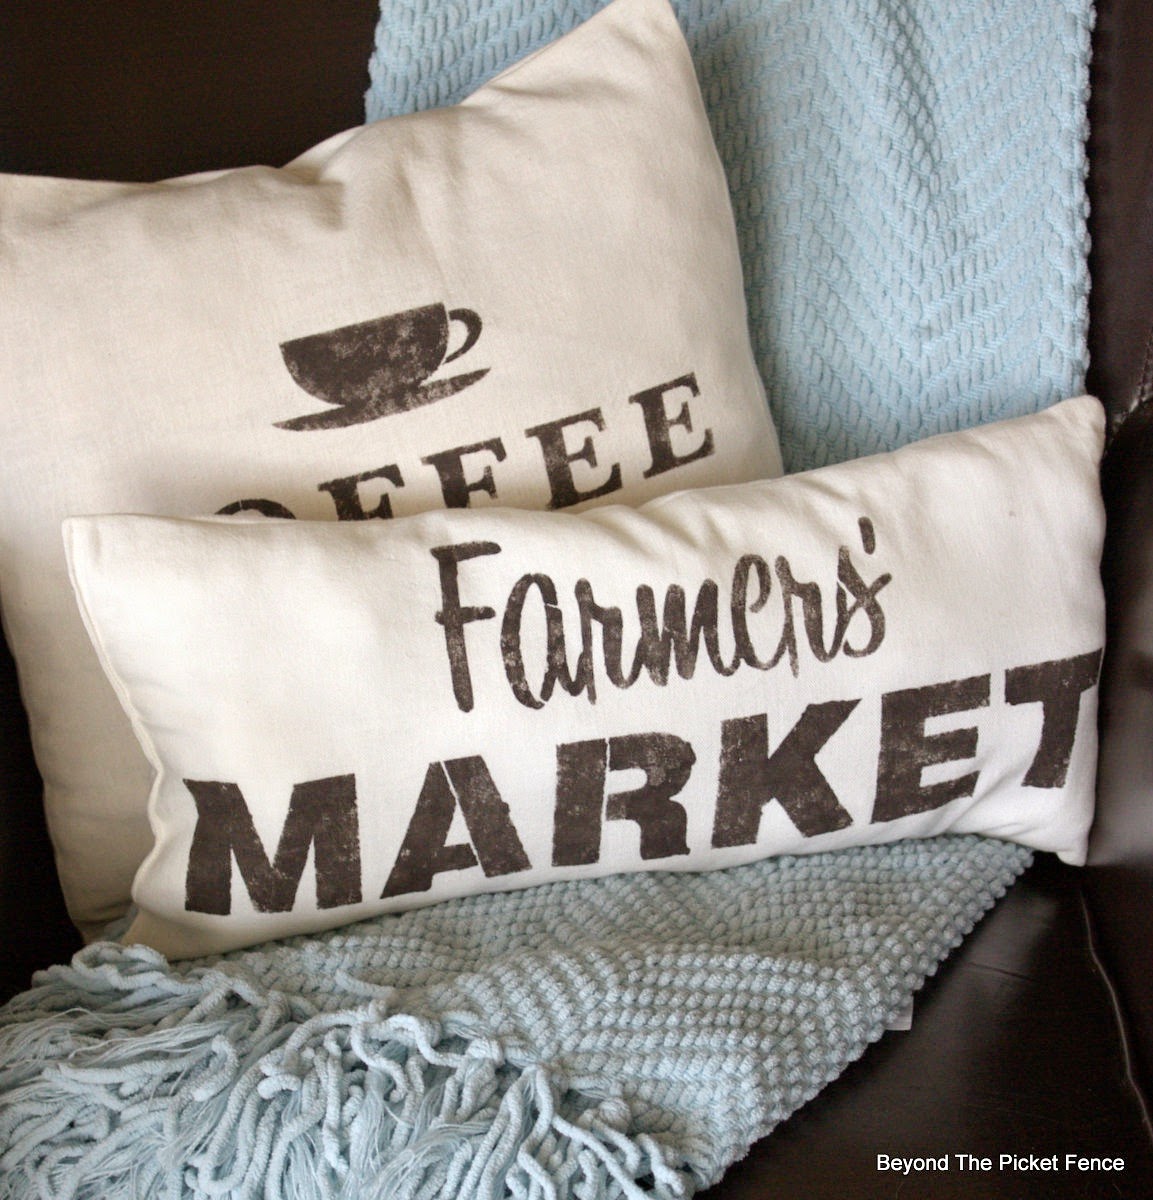 sewing, pillows, stencils, vintage, sign, coffee sign, beyond the picket fence, http://bec4-beyondthepicketfence.blogspot.com/2015/03/project-challenge-linenleather-fabric.html